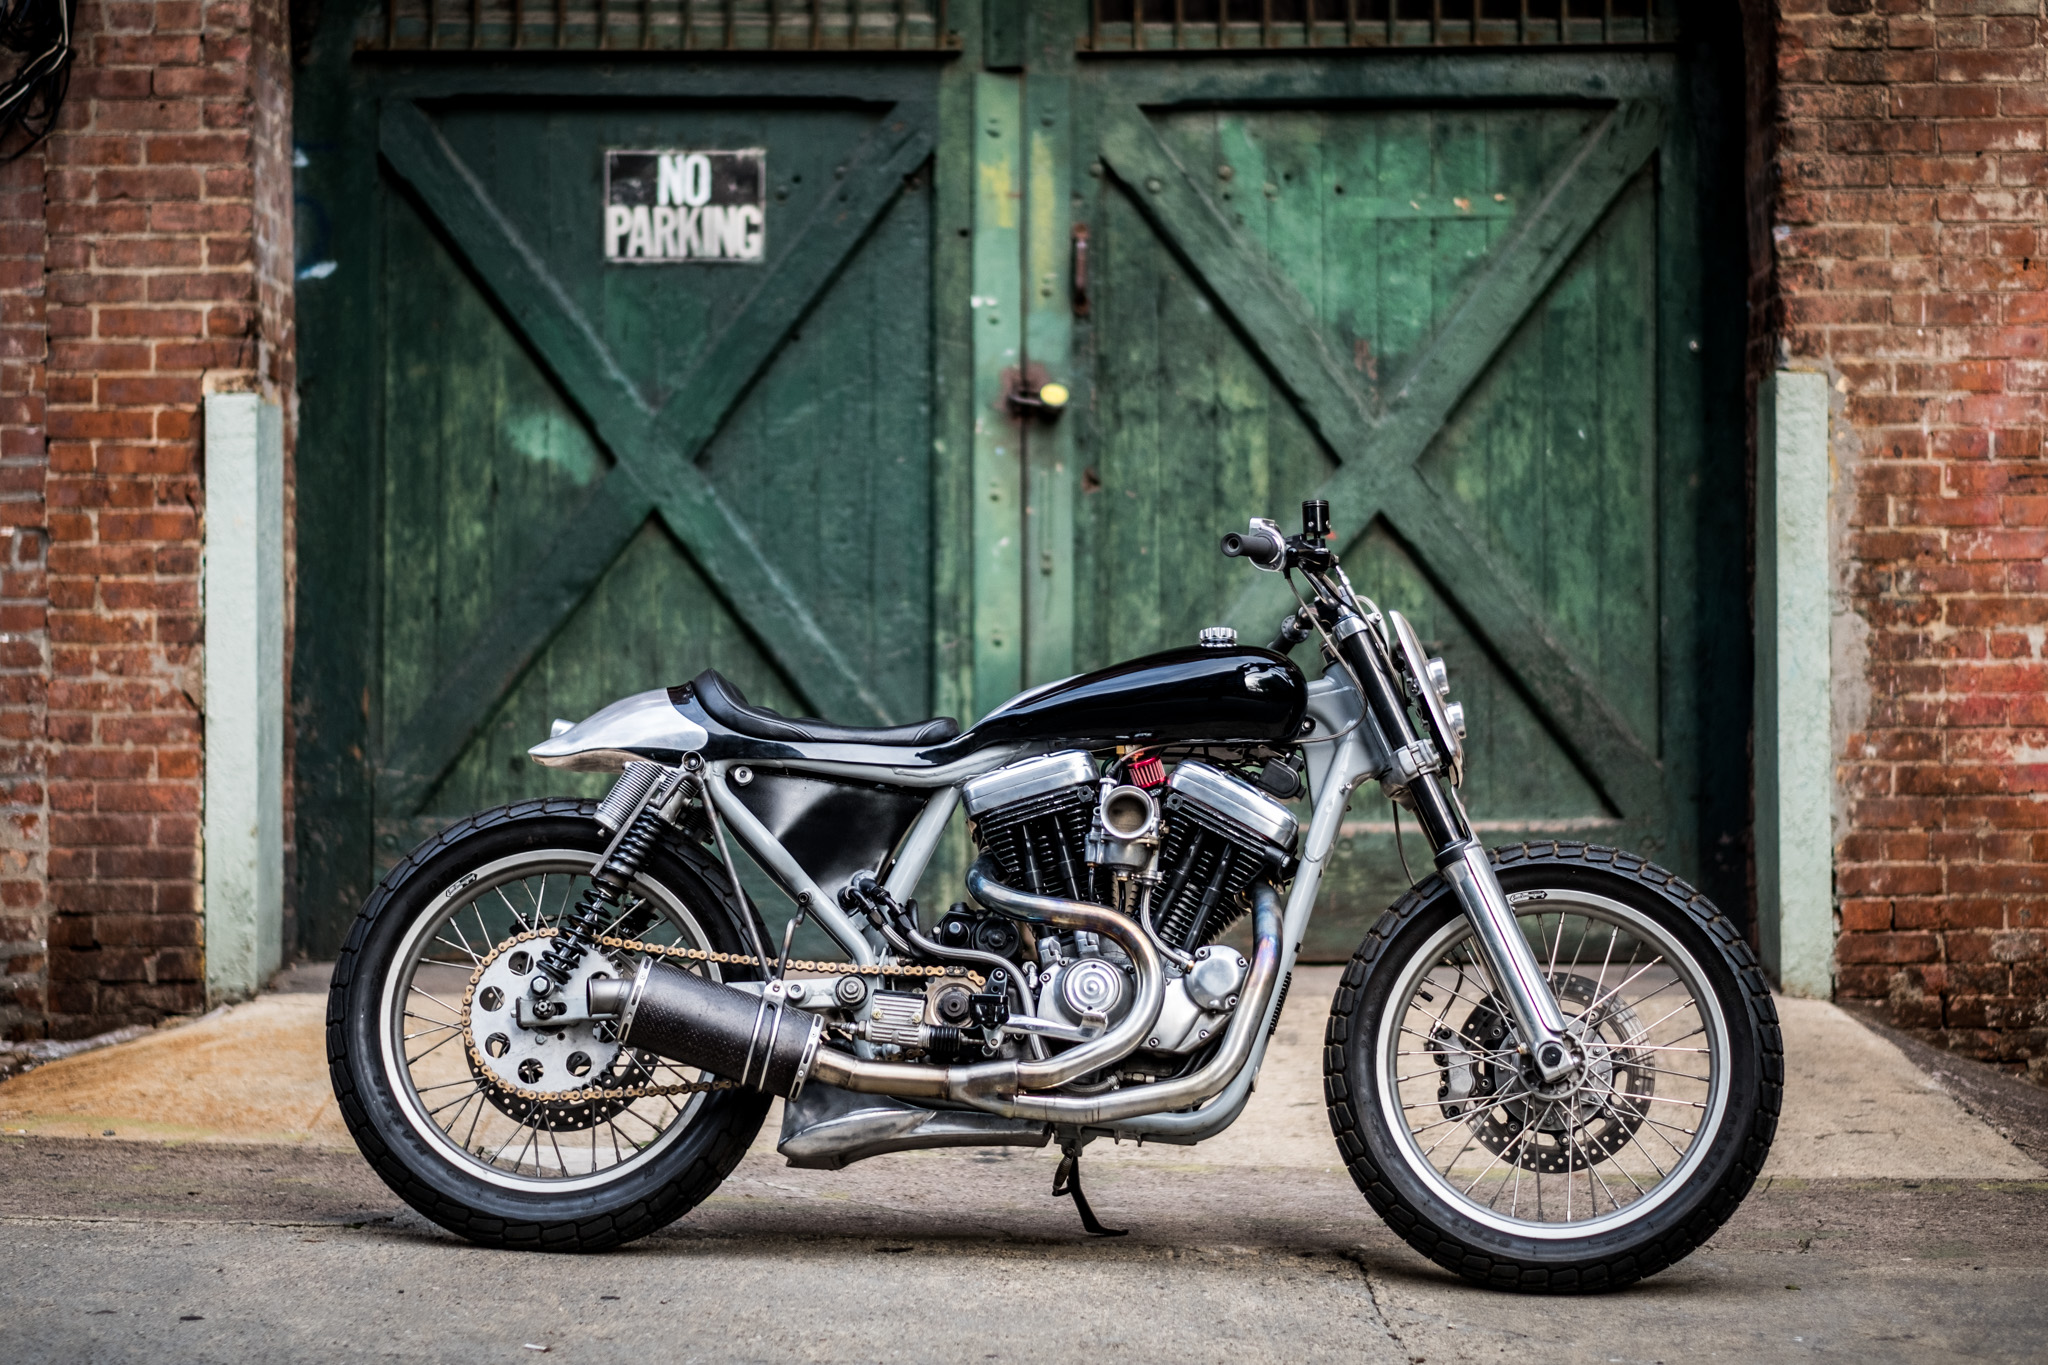 For Sale :: Tim Harney Motorcycles’ Harley Street Tracker